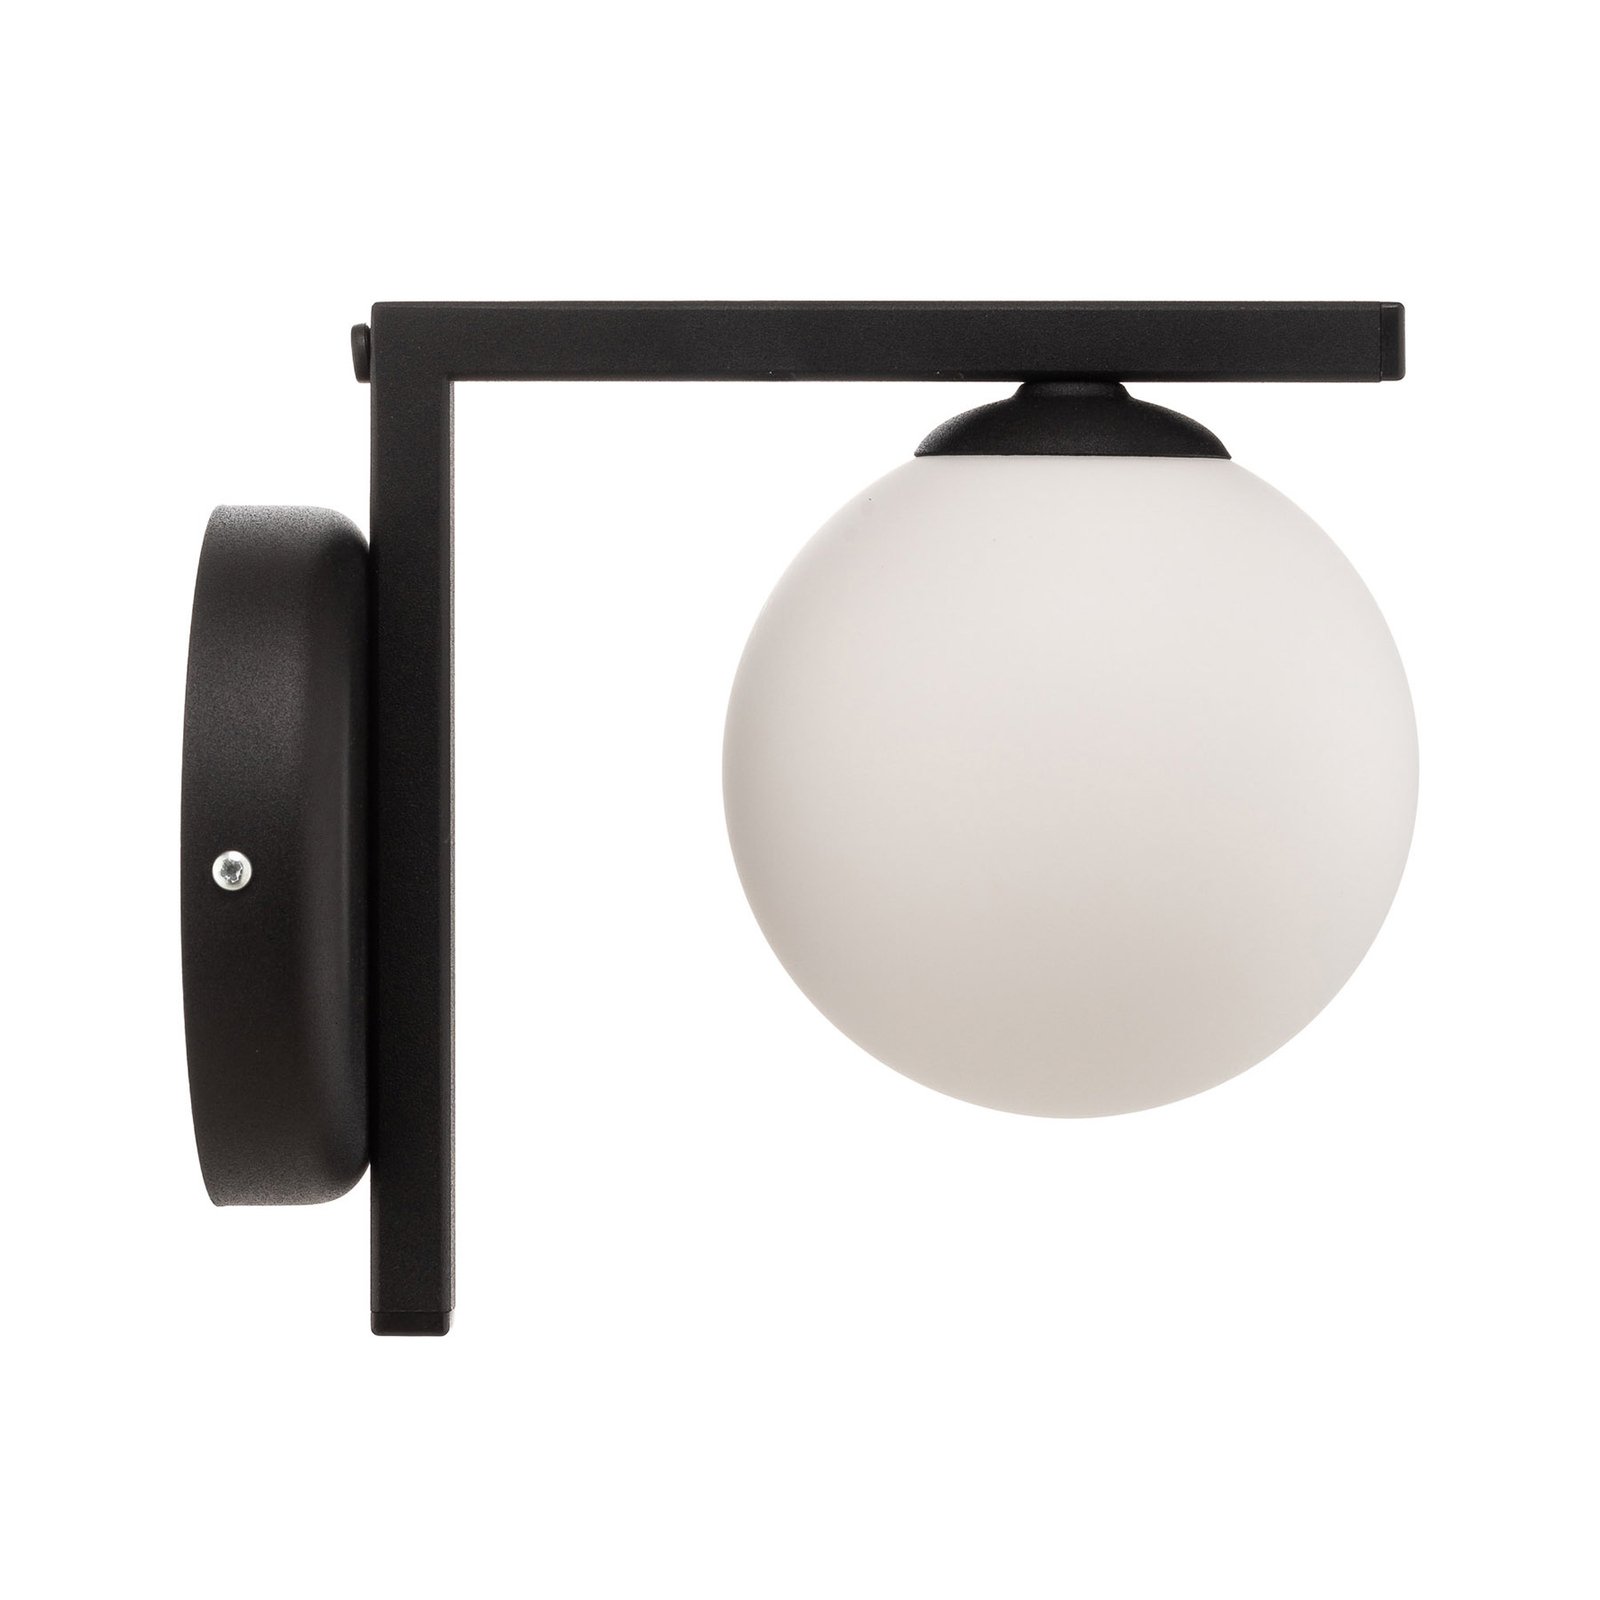 Zac wall light with spherical lampshade, black